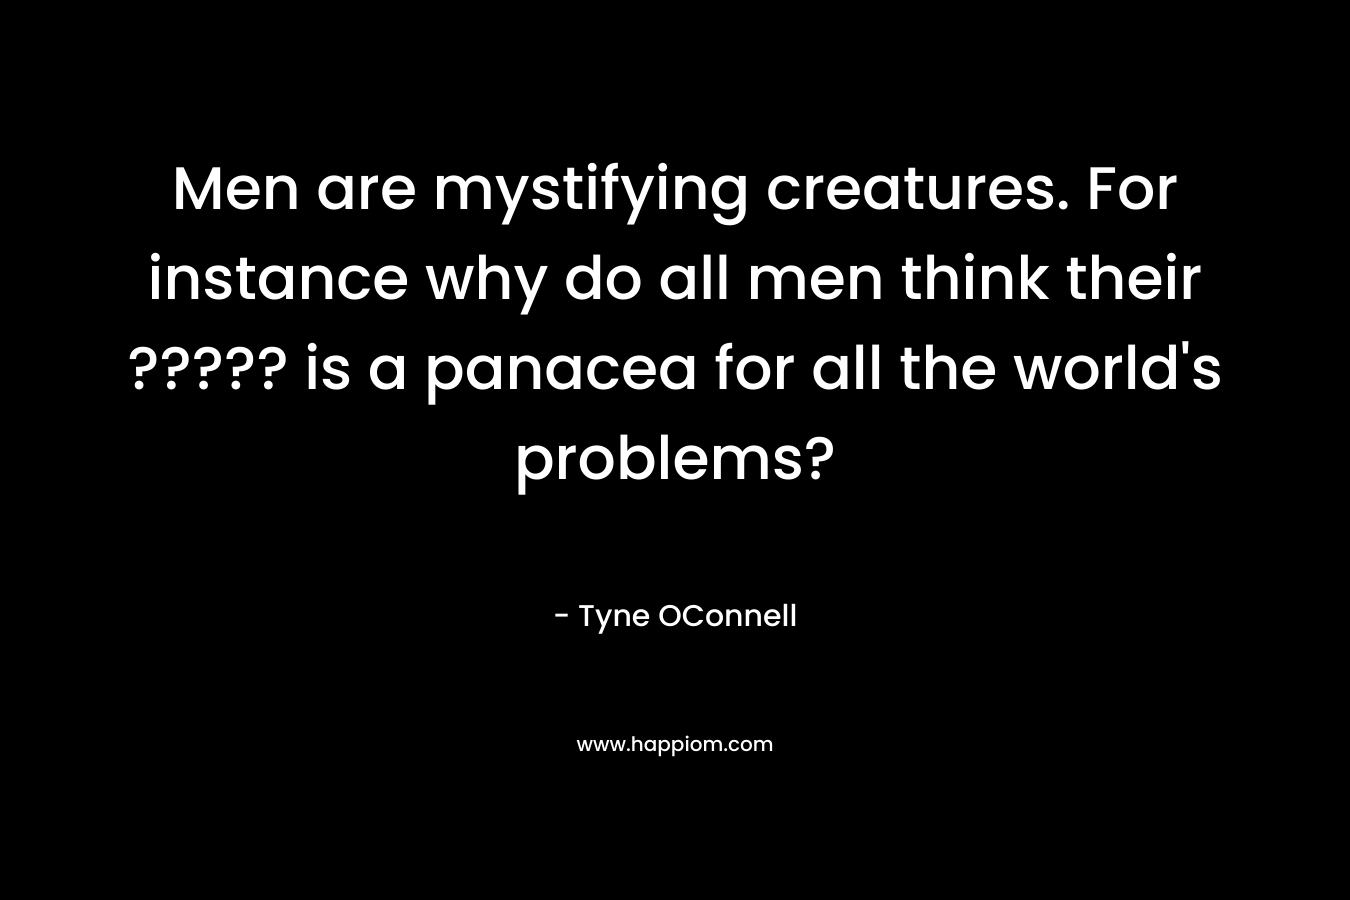 Men are mystifying creatures. For instance why do all men think their ????? is a panacea for all the world's problems?